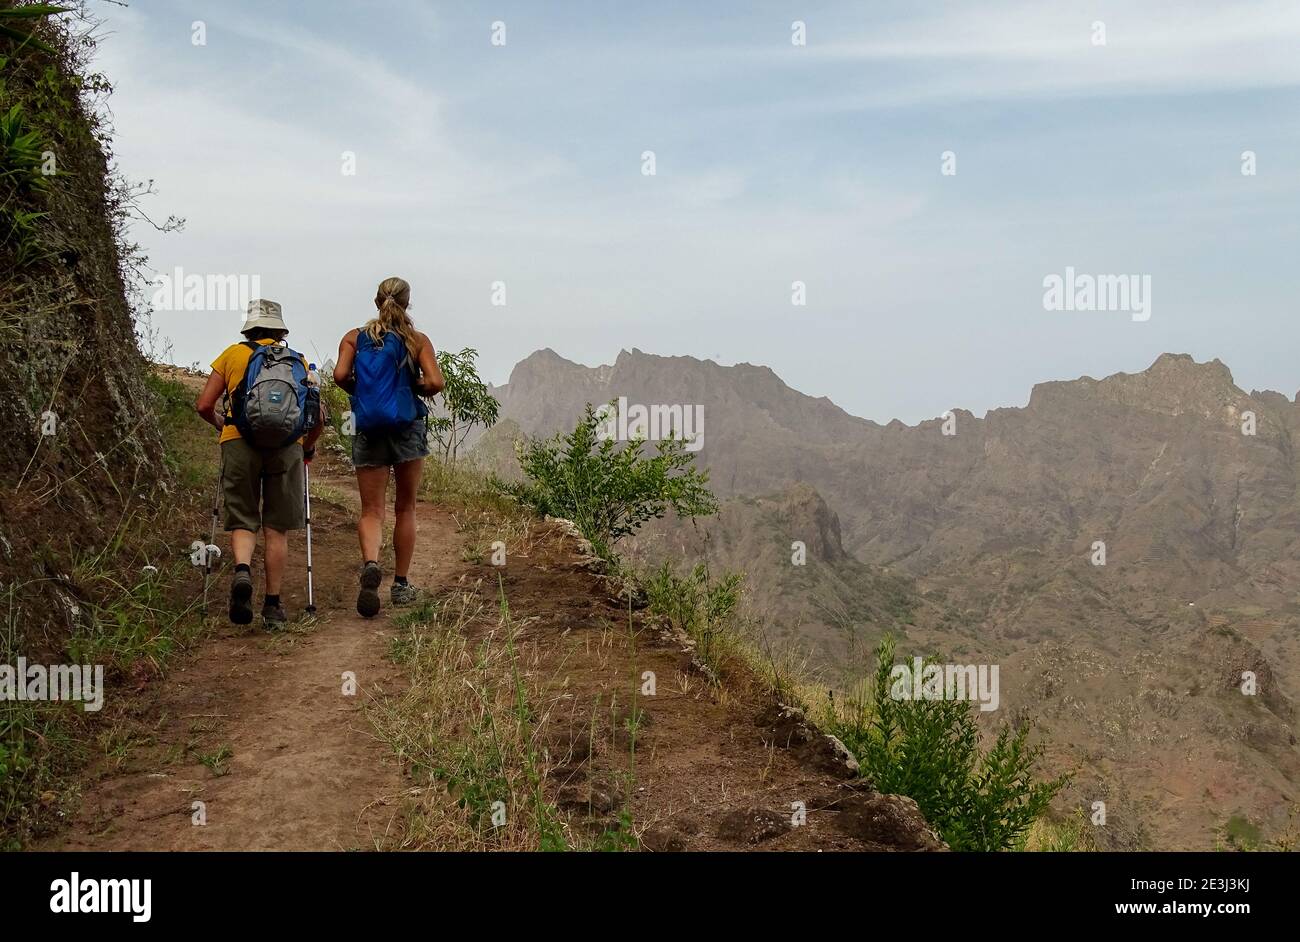 Cape Verde, Santo Antao, walking tour, couple, two persons, hiking. Stock Photo